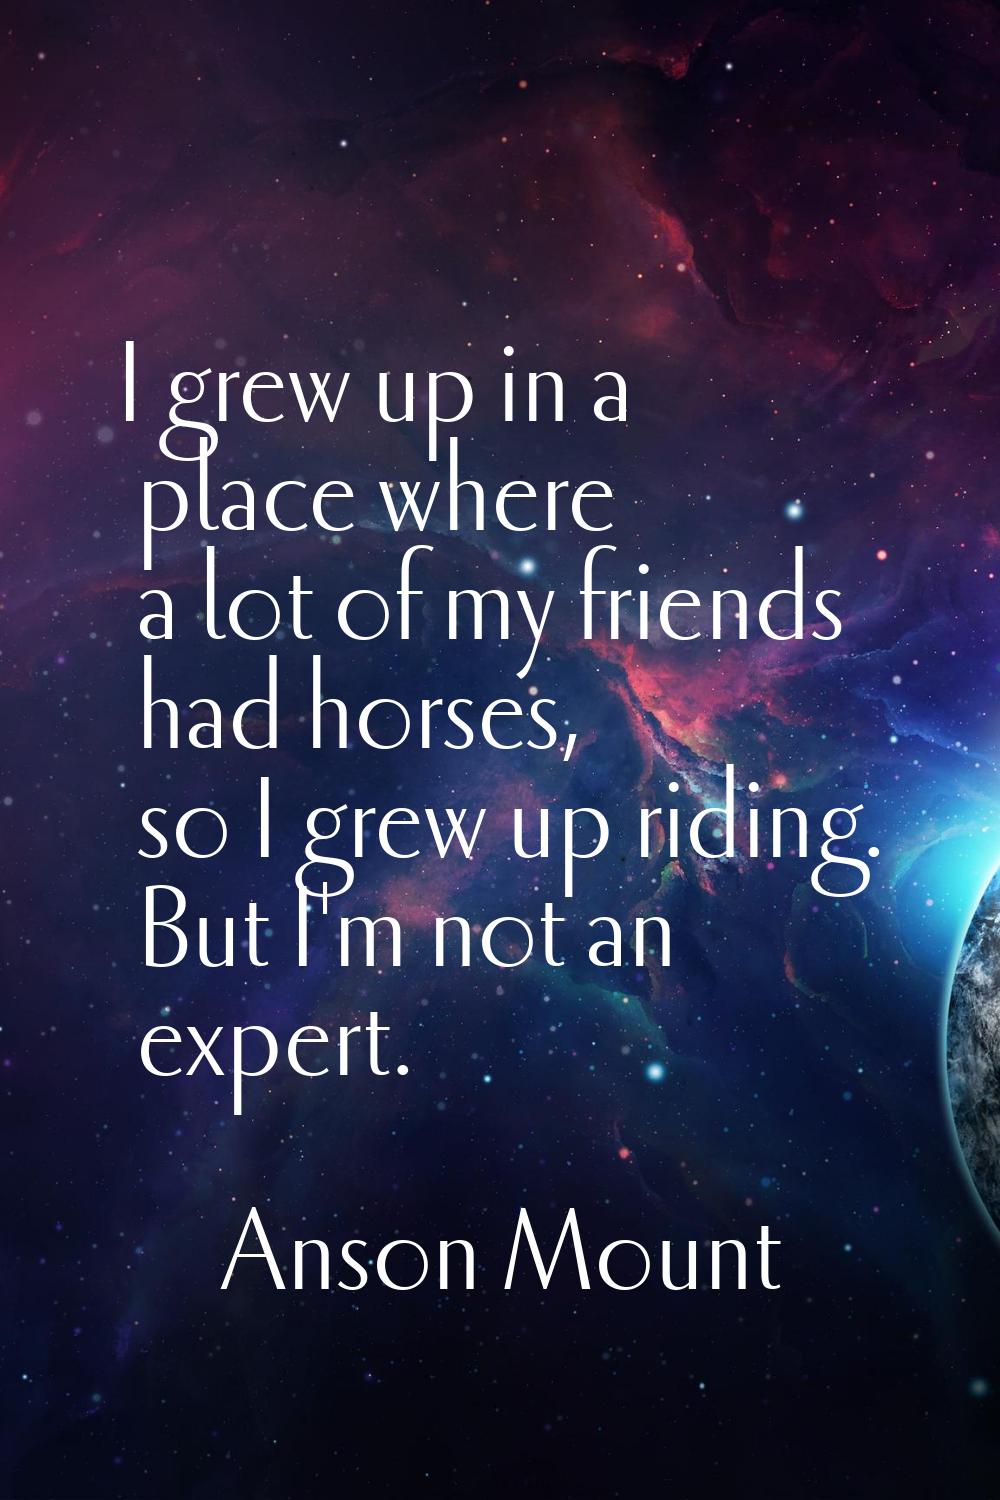 I grew up in a place where a lot of my friends had horses, so I grew up riding. But I'm not an expe